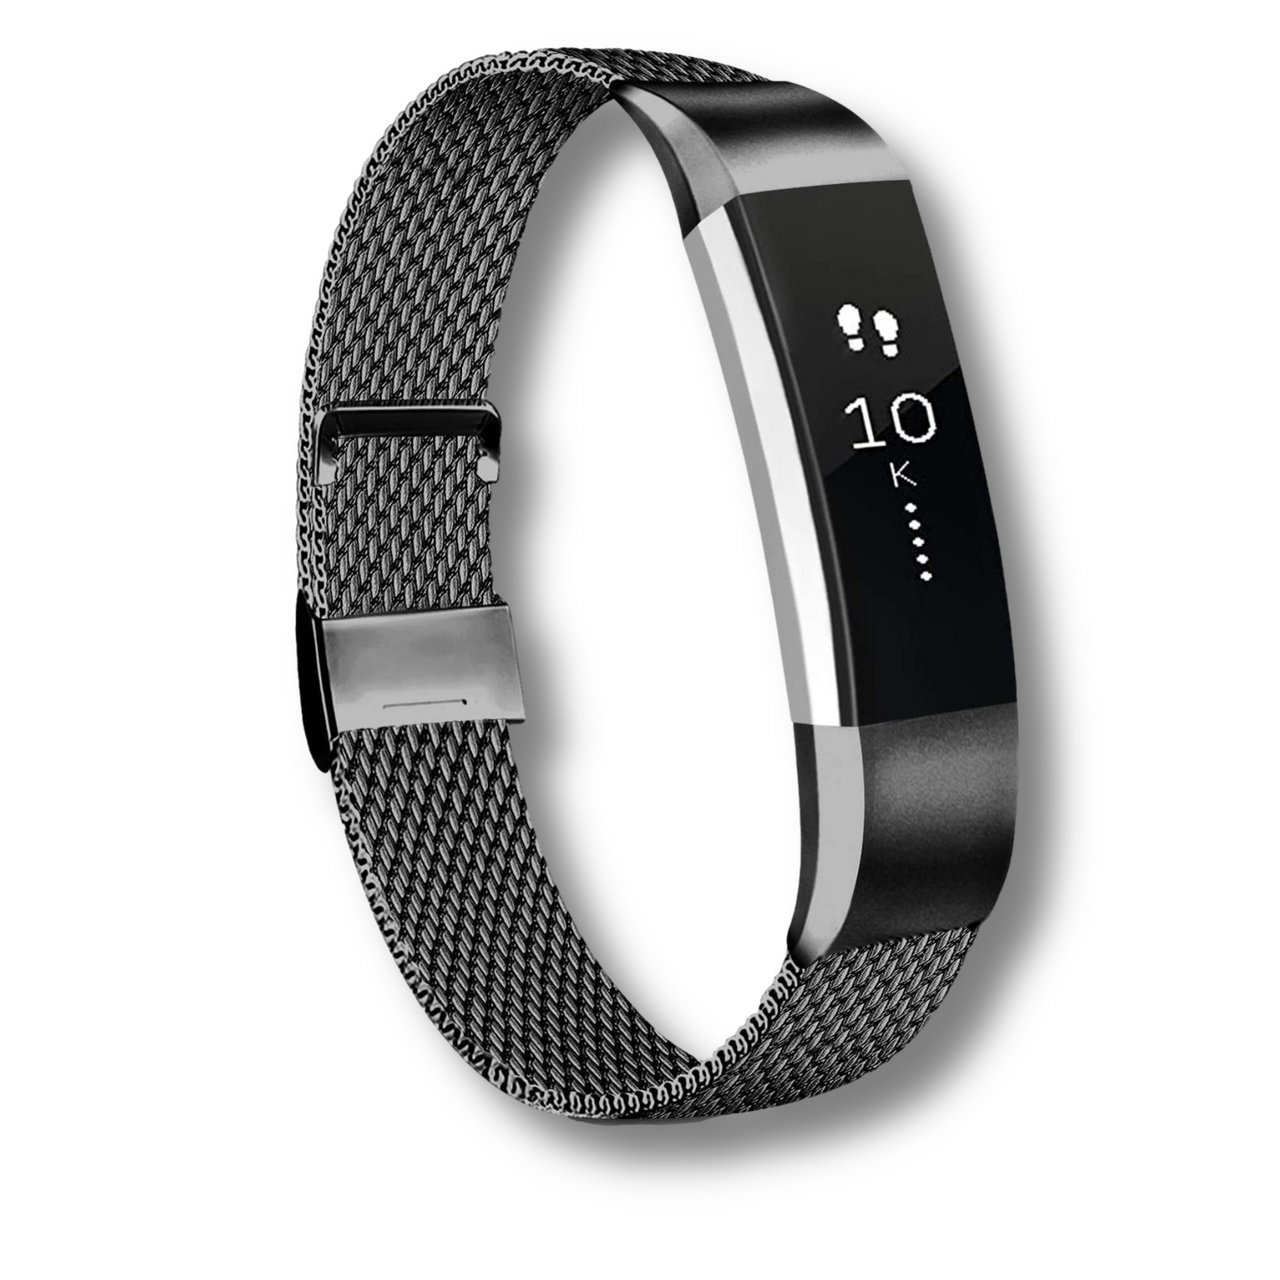 Stainless Steel Strap & Link for Fitbit Alta HR / Alta - watchband.direct